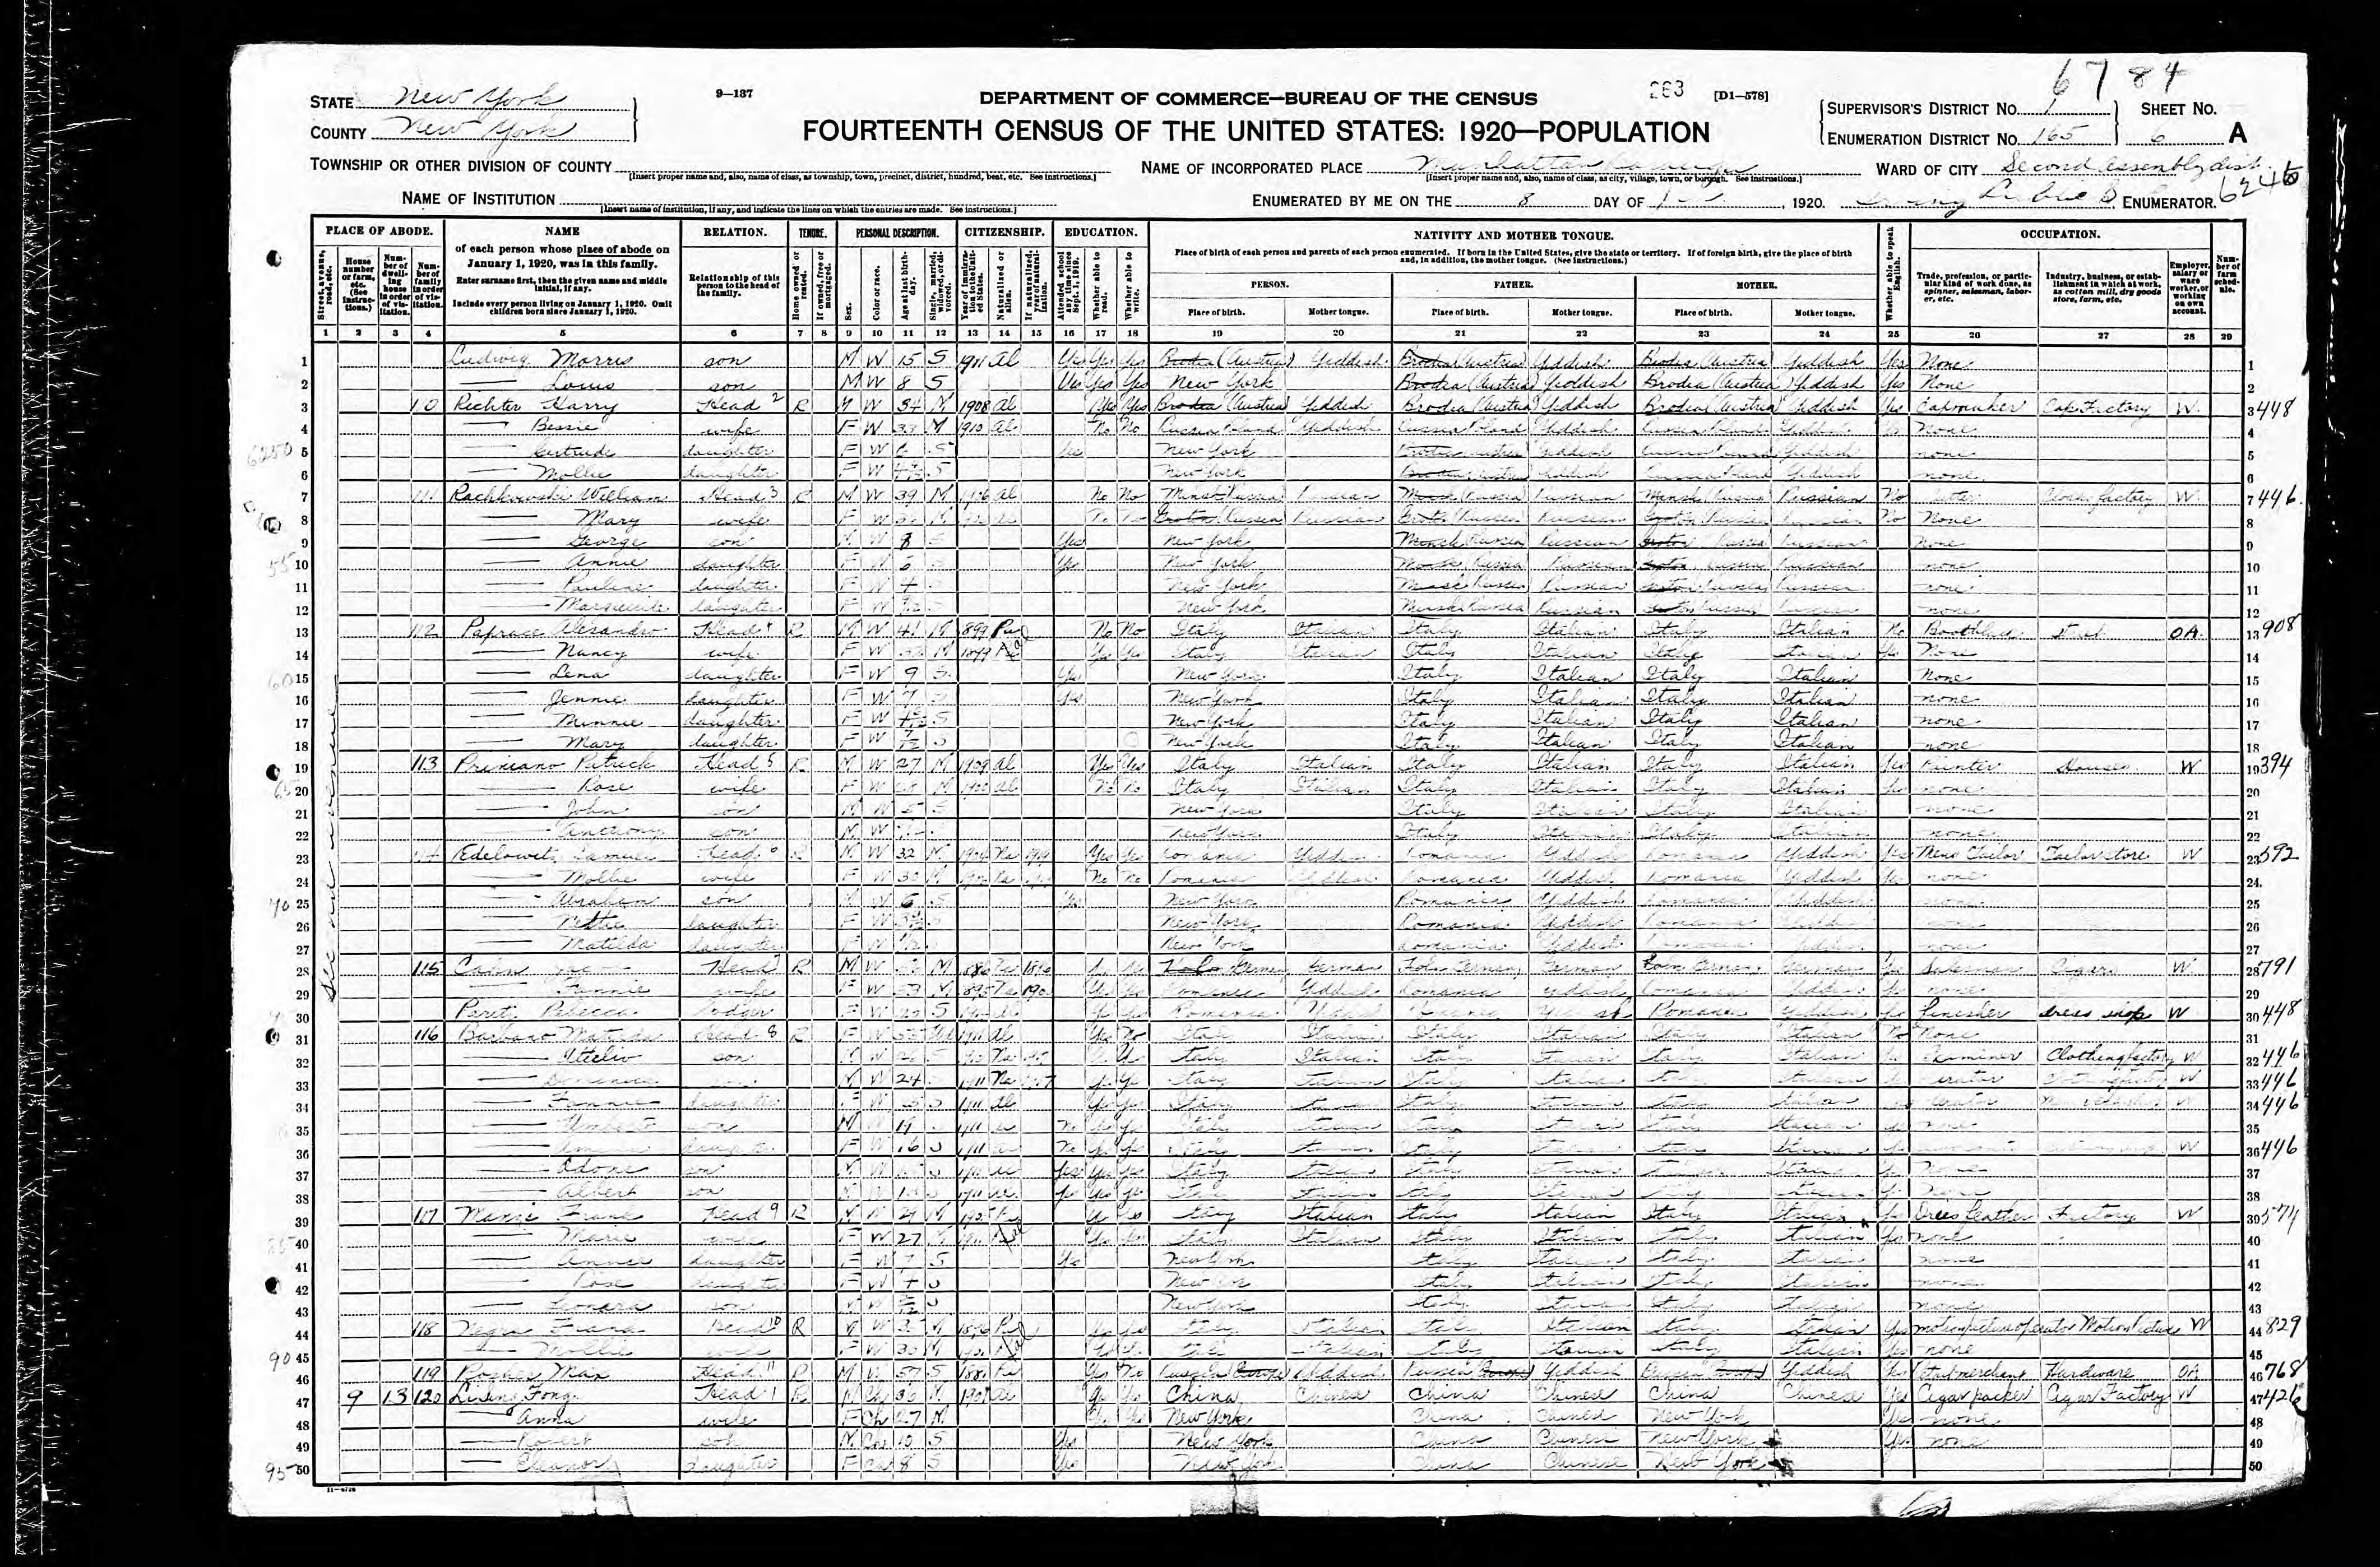 Sam Edelowitz and family 1920 census